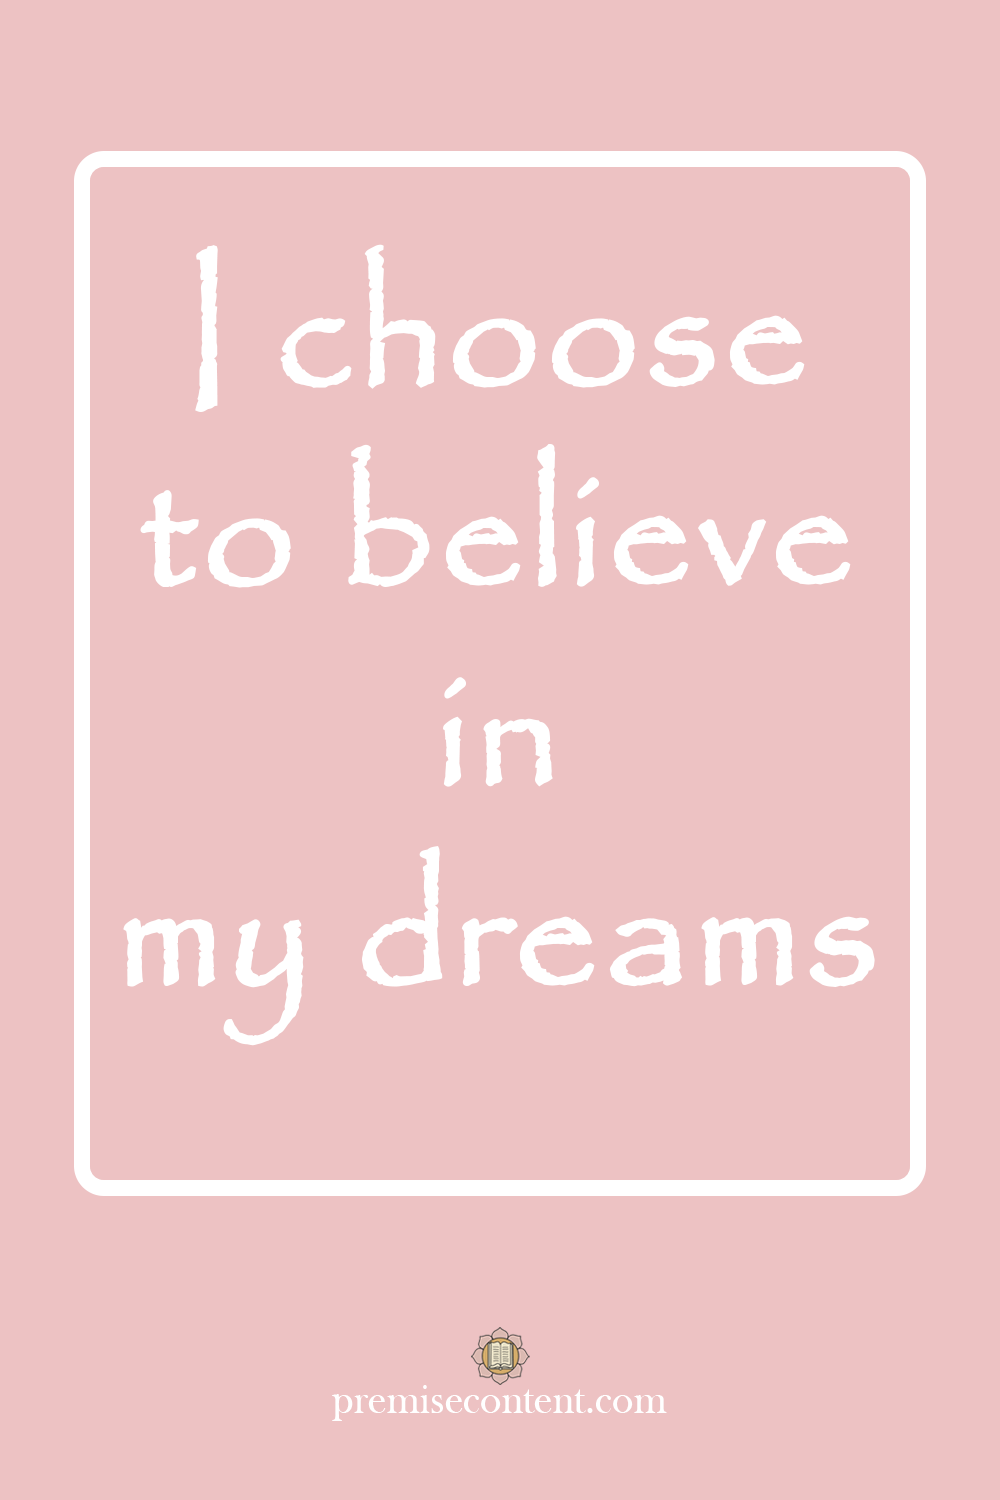 I choose to believe in my dreams - Positive Affirmation